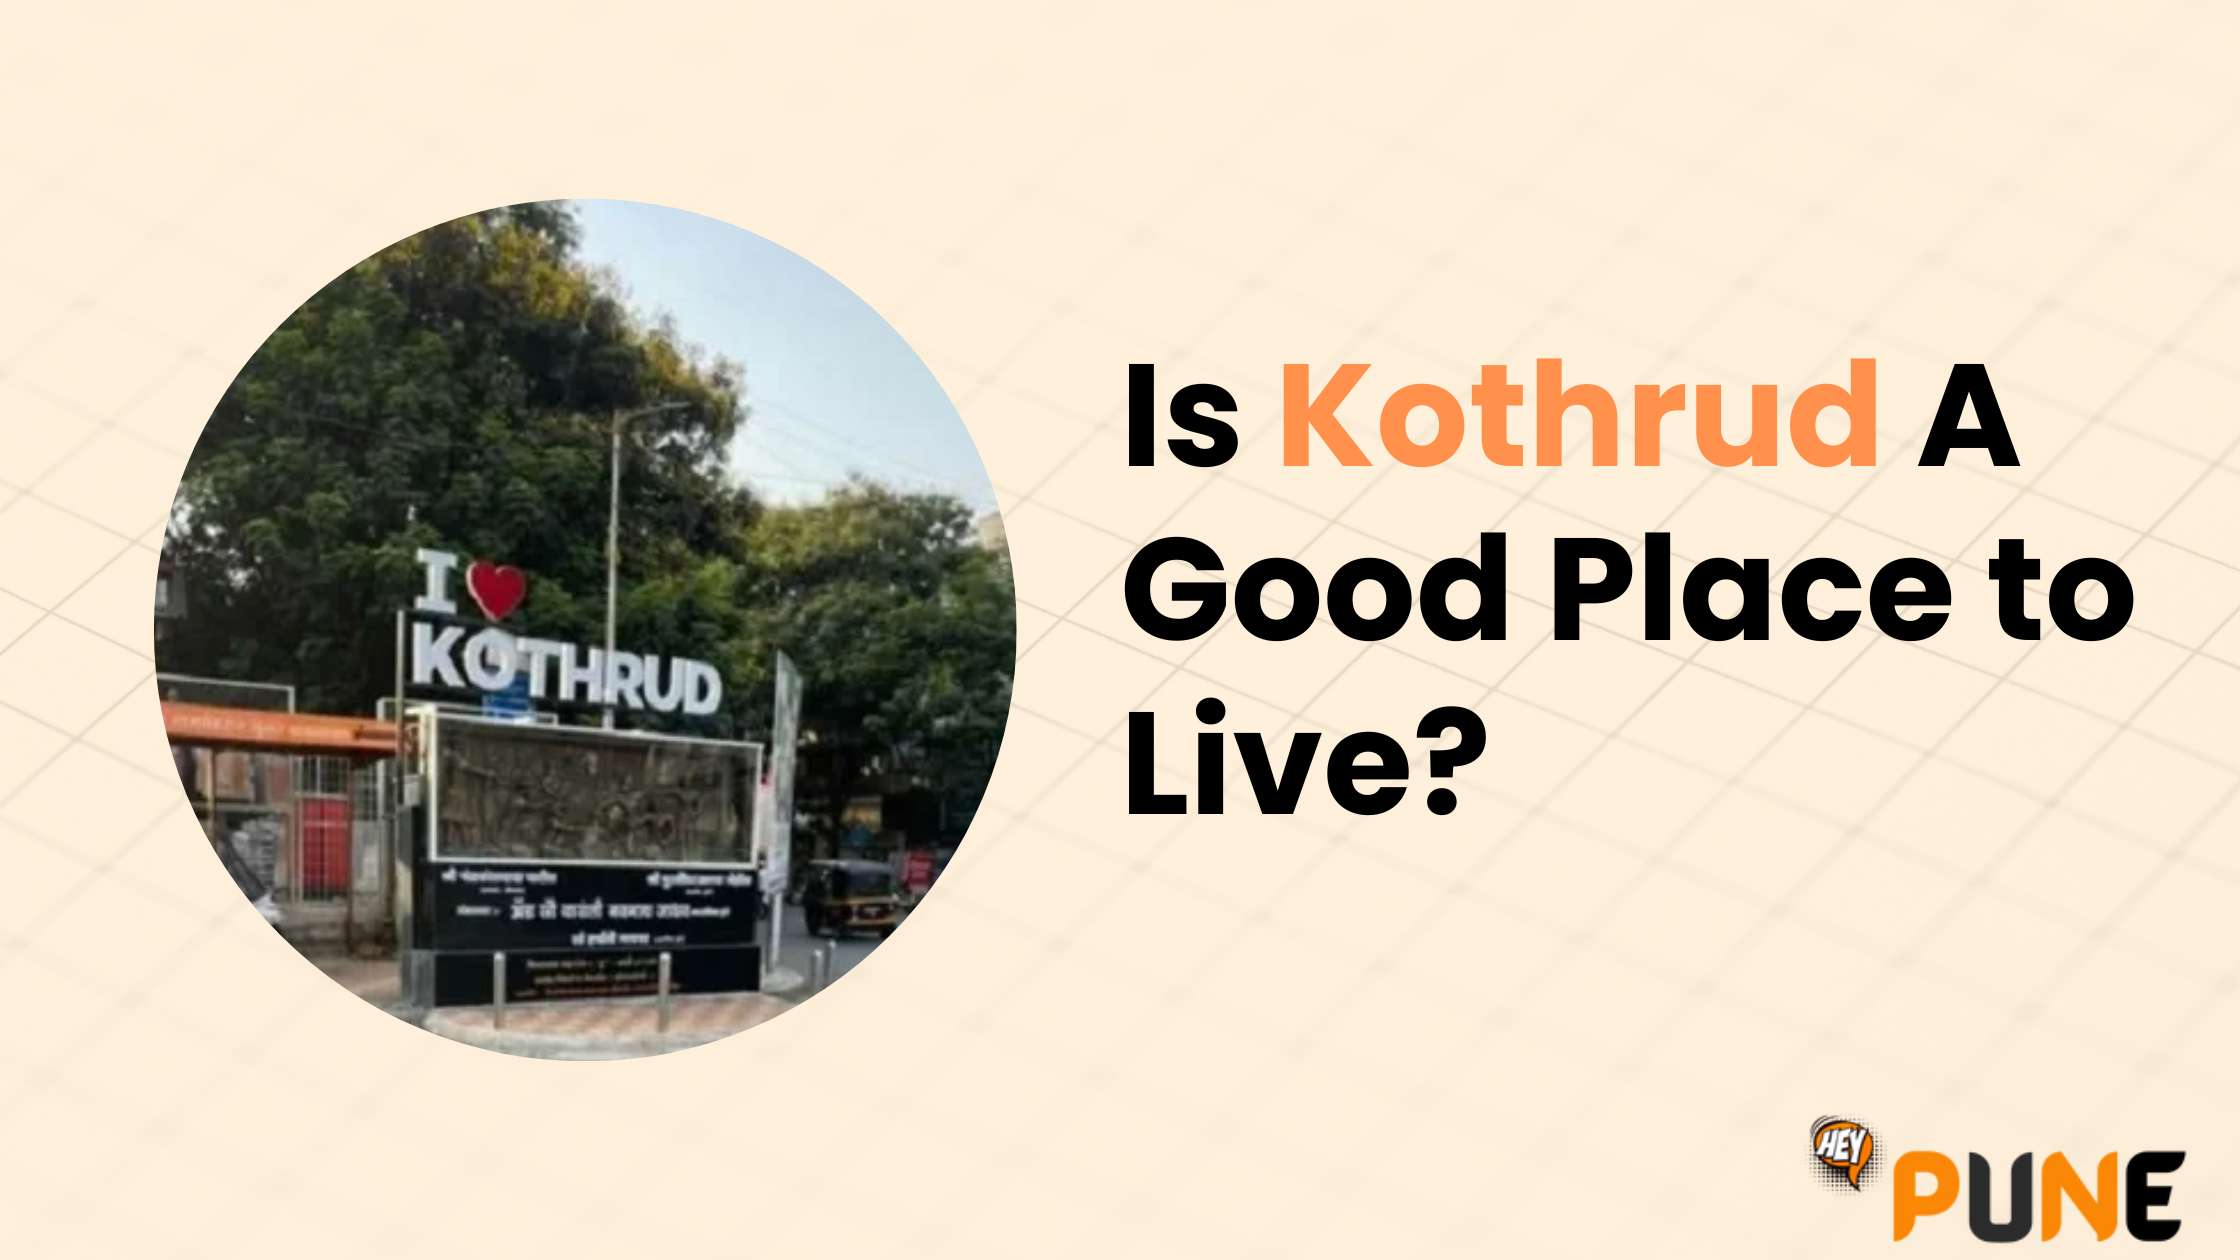 Is Kothrud A Good Place to Live